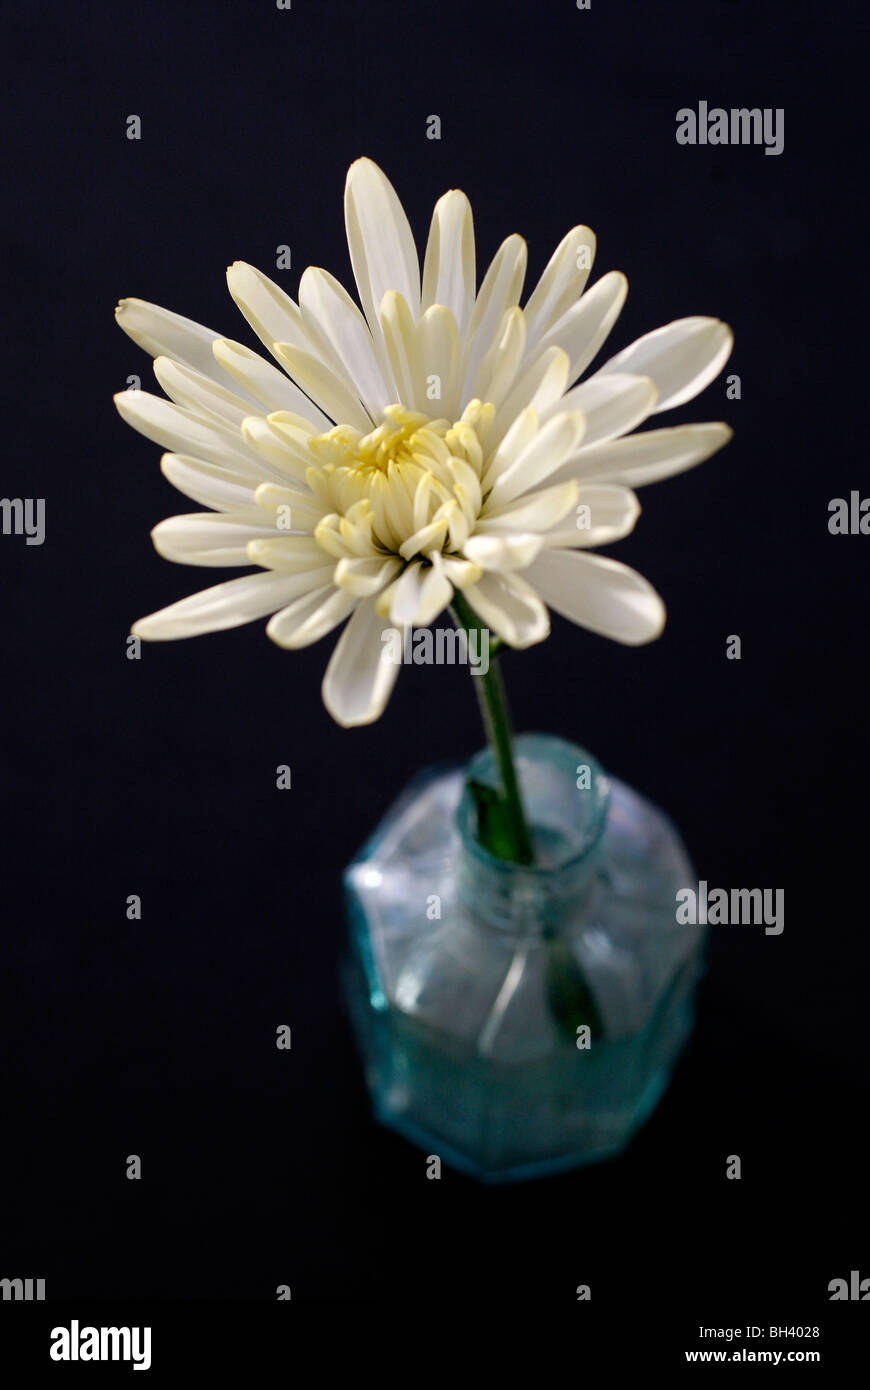 A single pale yellow Chrysanthemum flower in a small blue glass vase Stock Photo